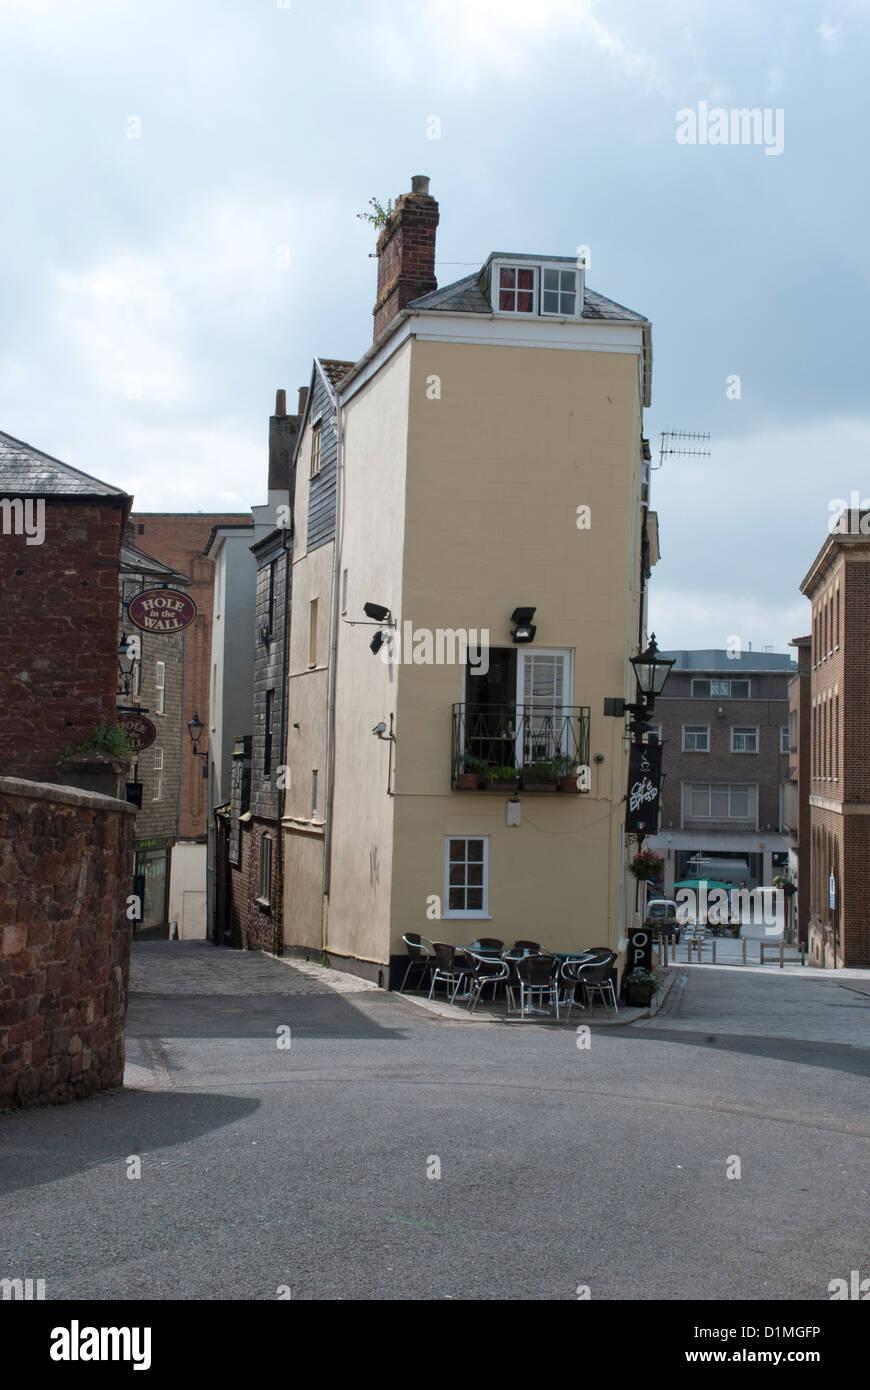 exeter city side street near hole in the wall pub Stock Photo